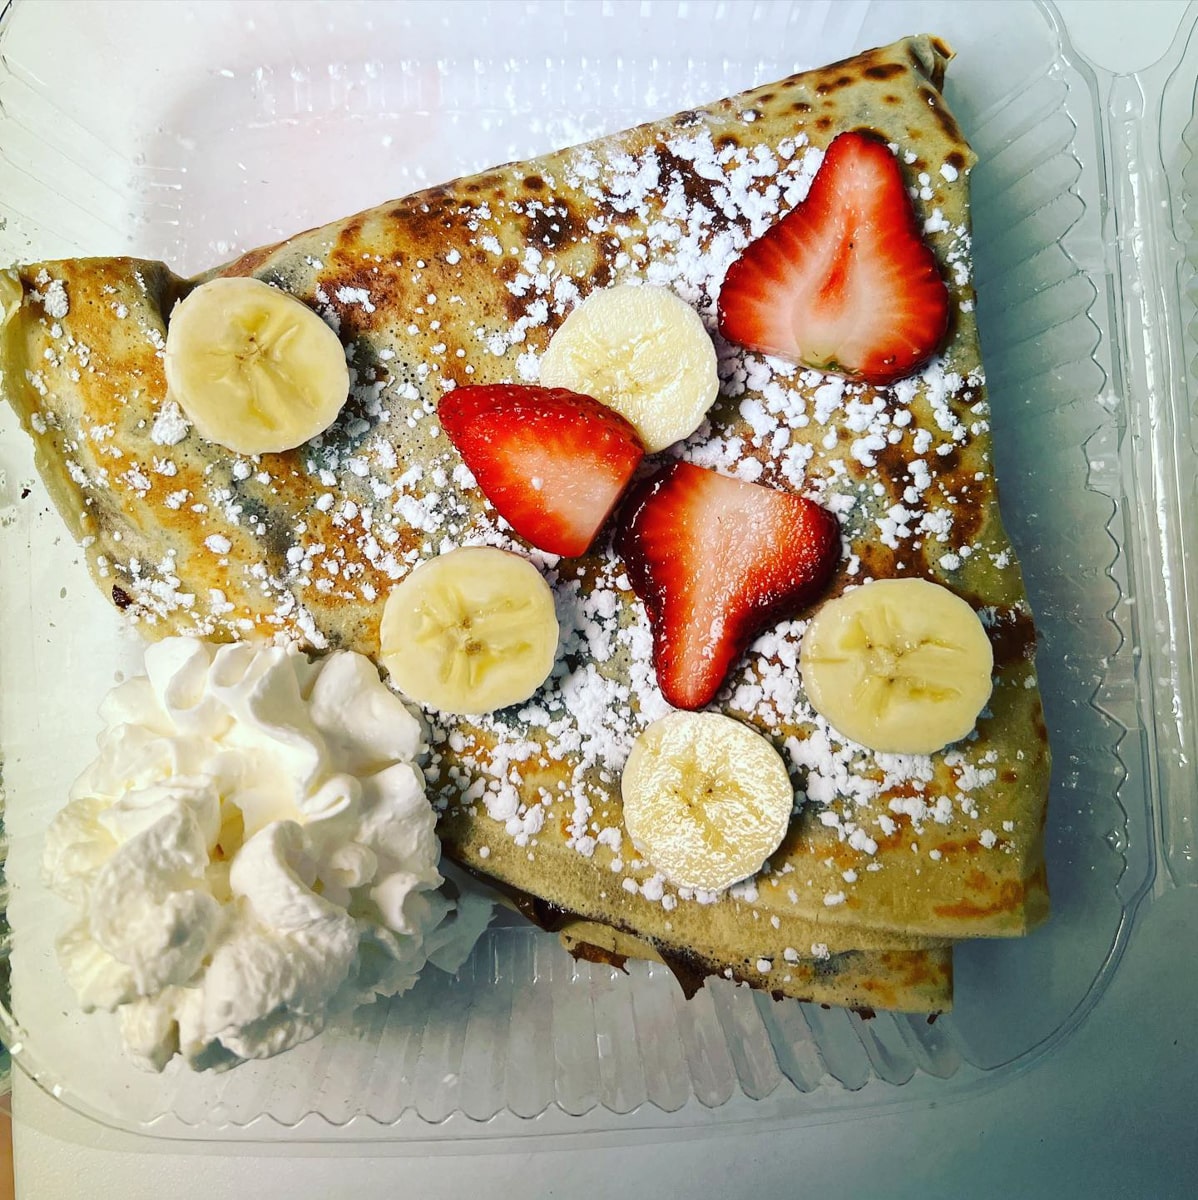 A Sweet Crepe with bananas and strawberries at Smoky Mountains Creperie in Gatlinburg TN 